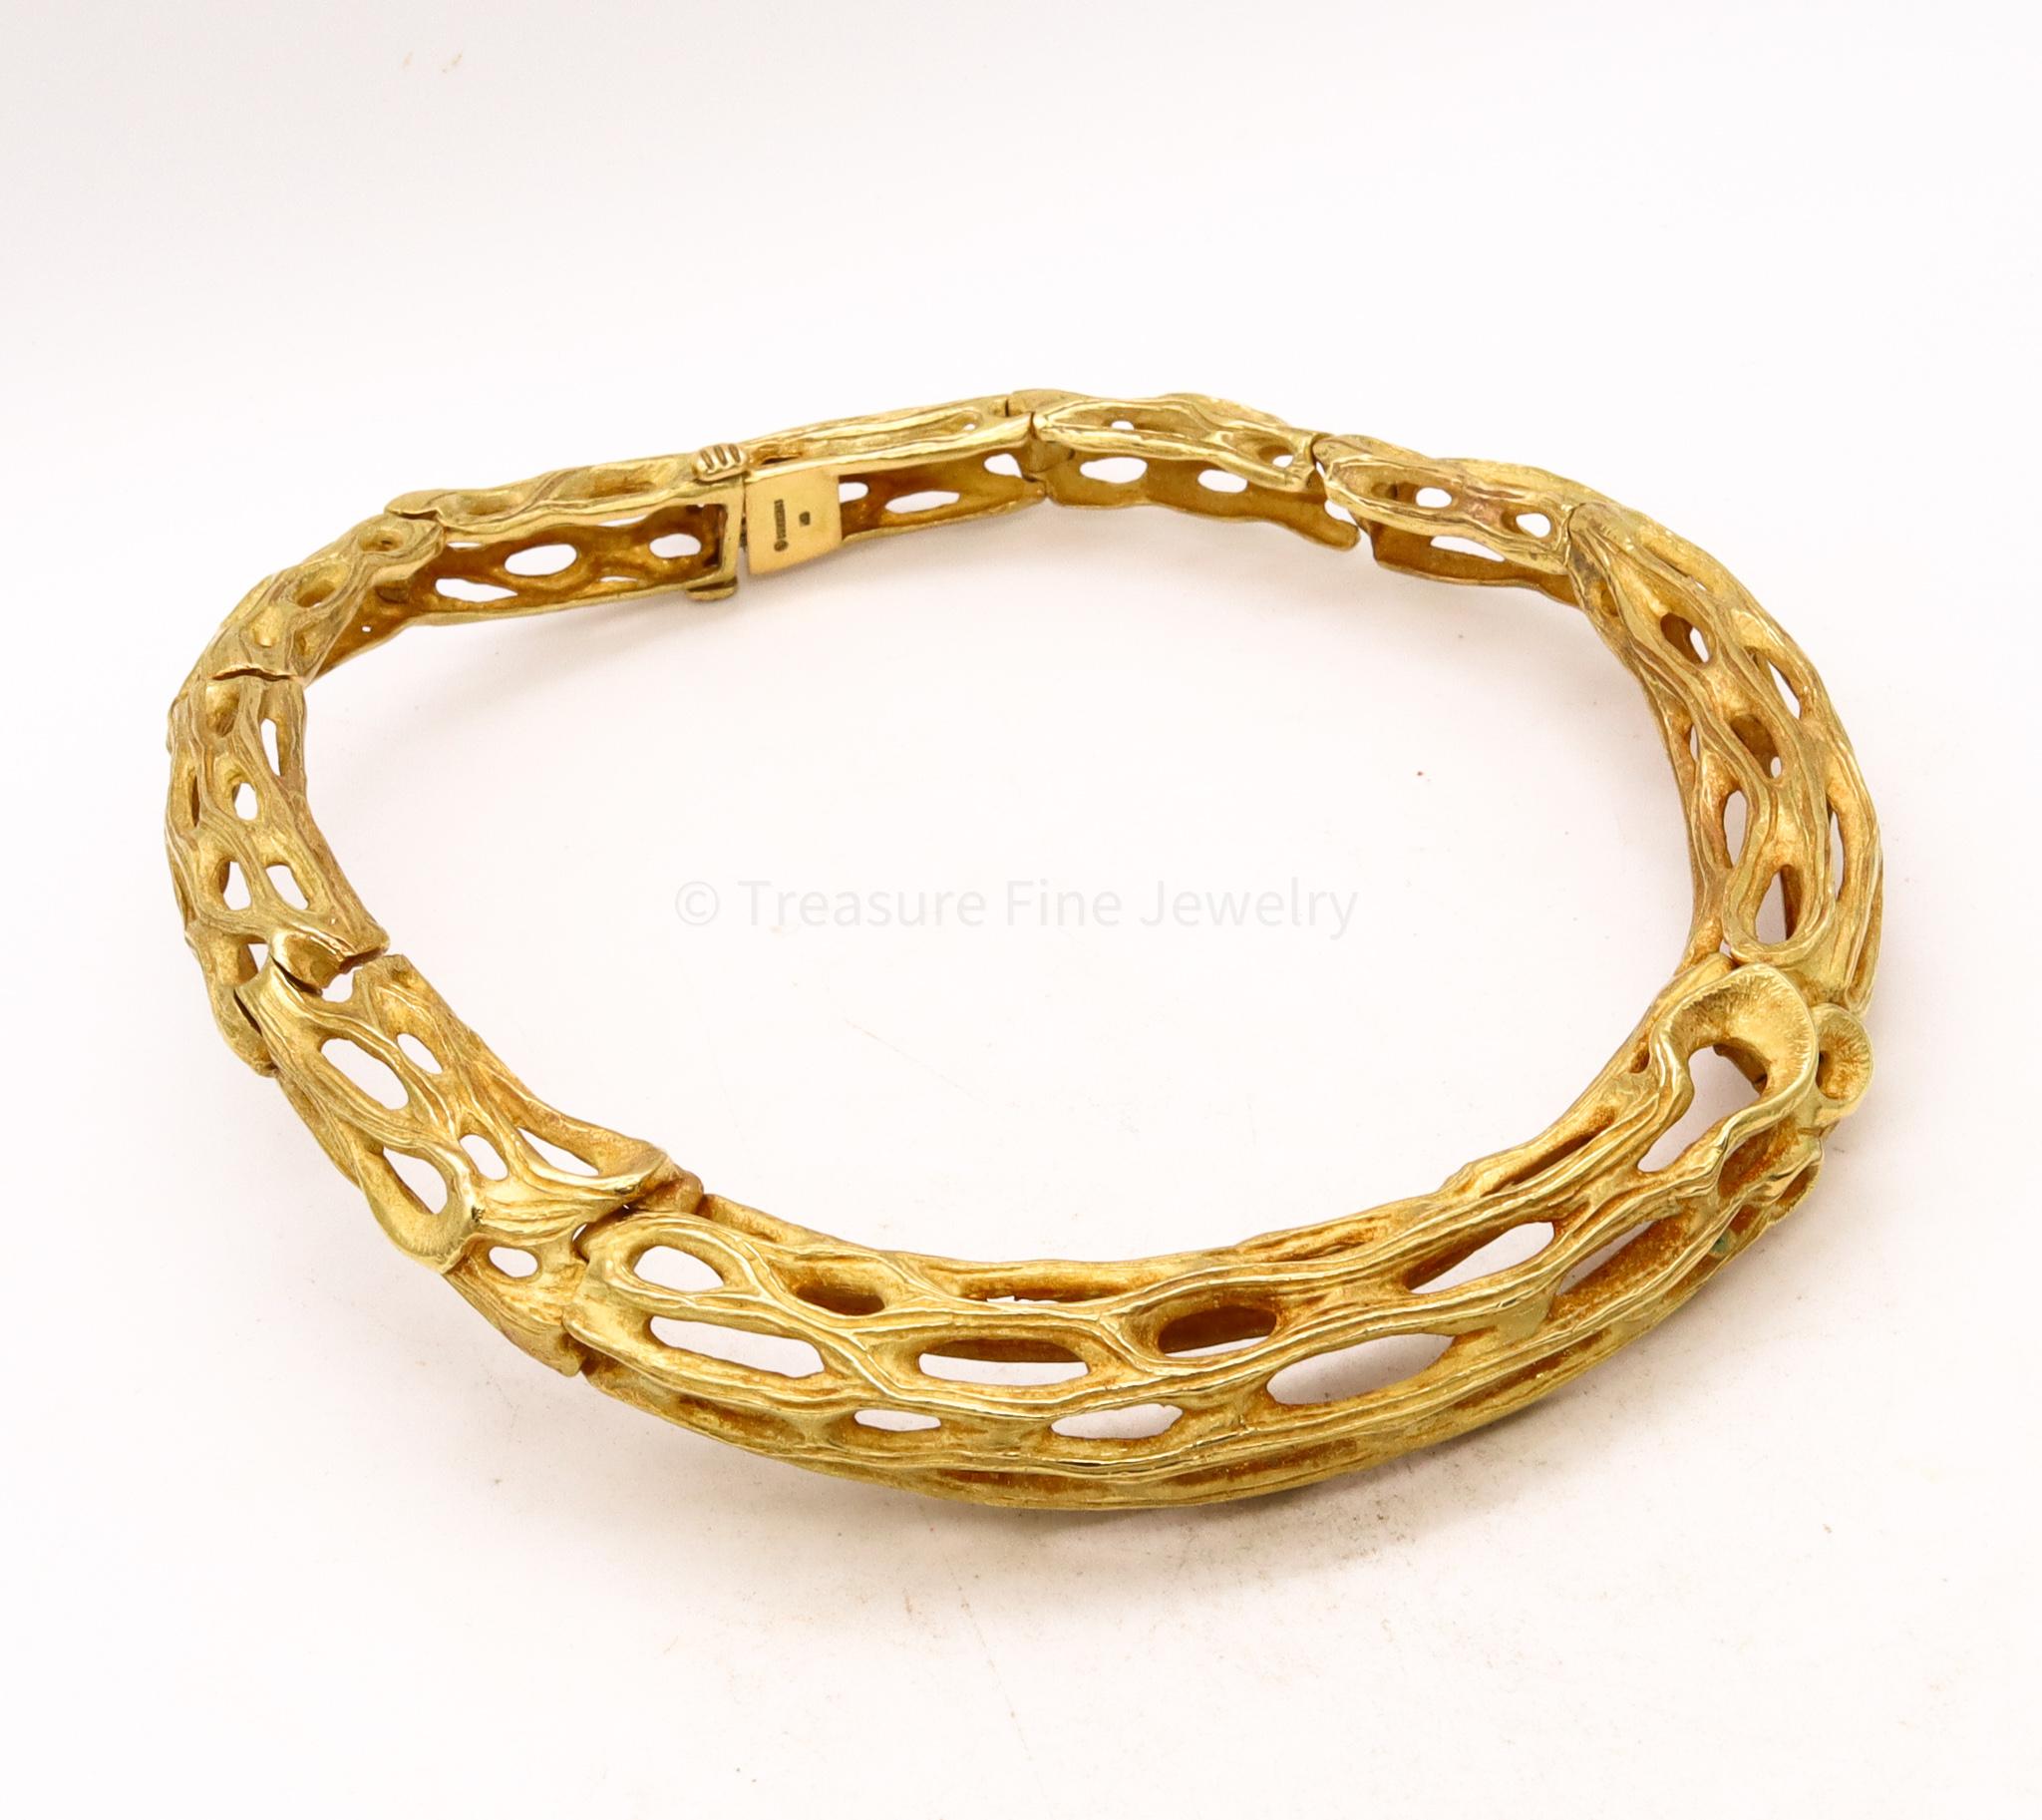 Angela Cummings Studio 1983 Very Rare Organic Necklace in Solid 18kt Yellow Gold 3